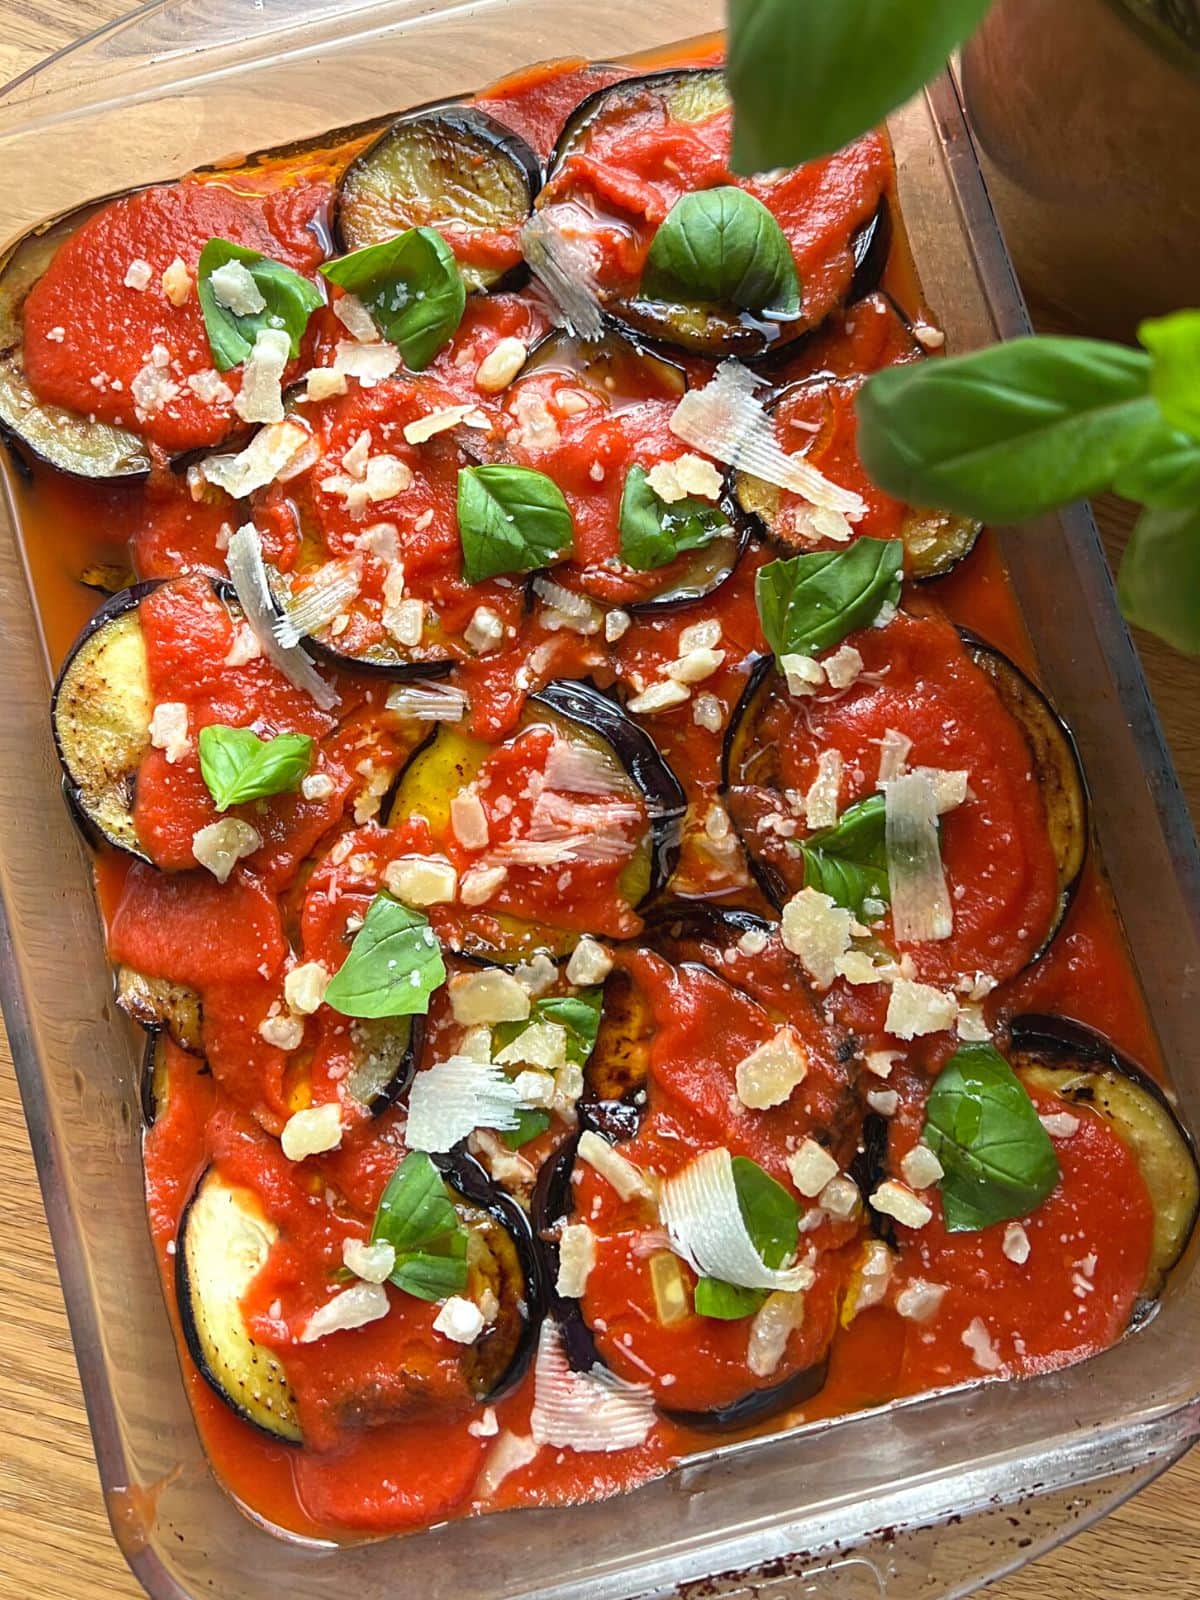 Eggplant parmesan in a dish with basil ready for baking.